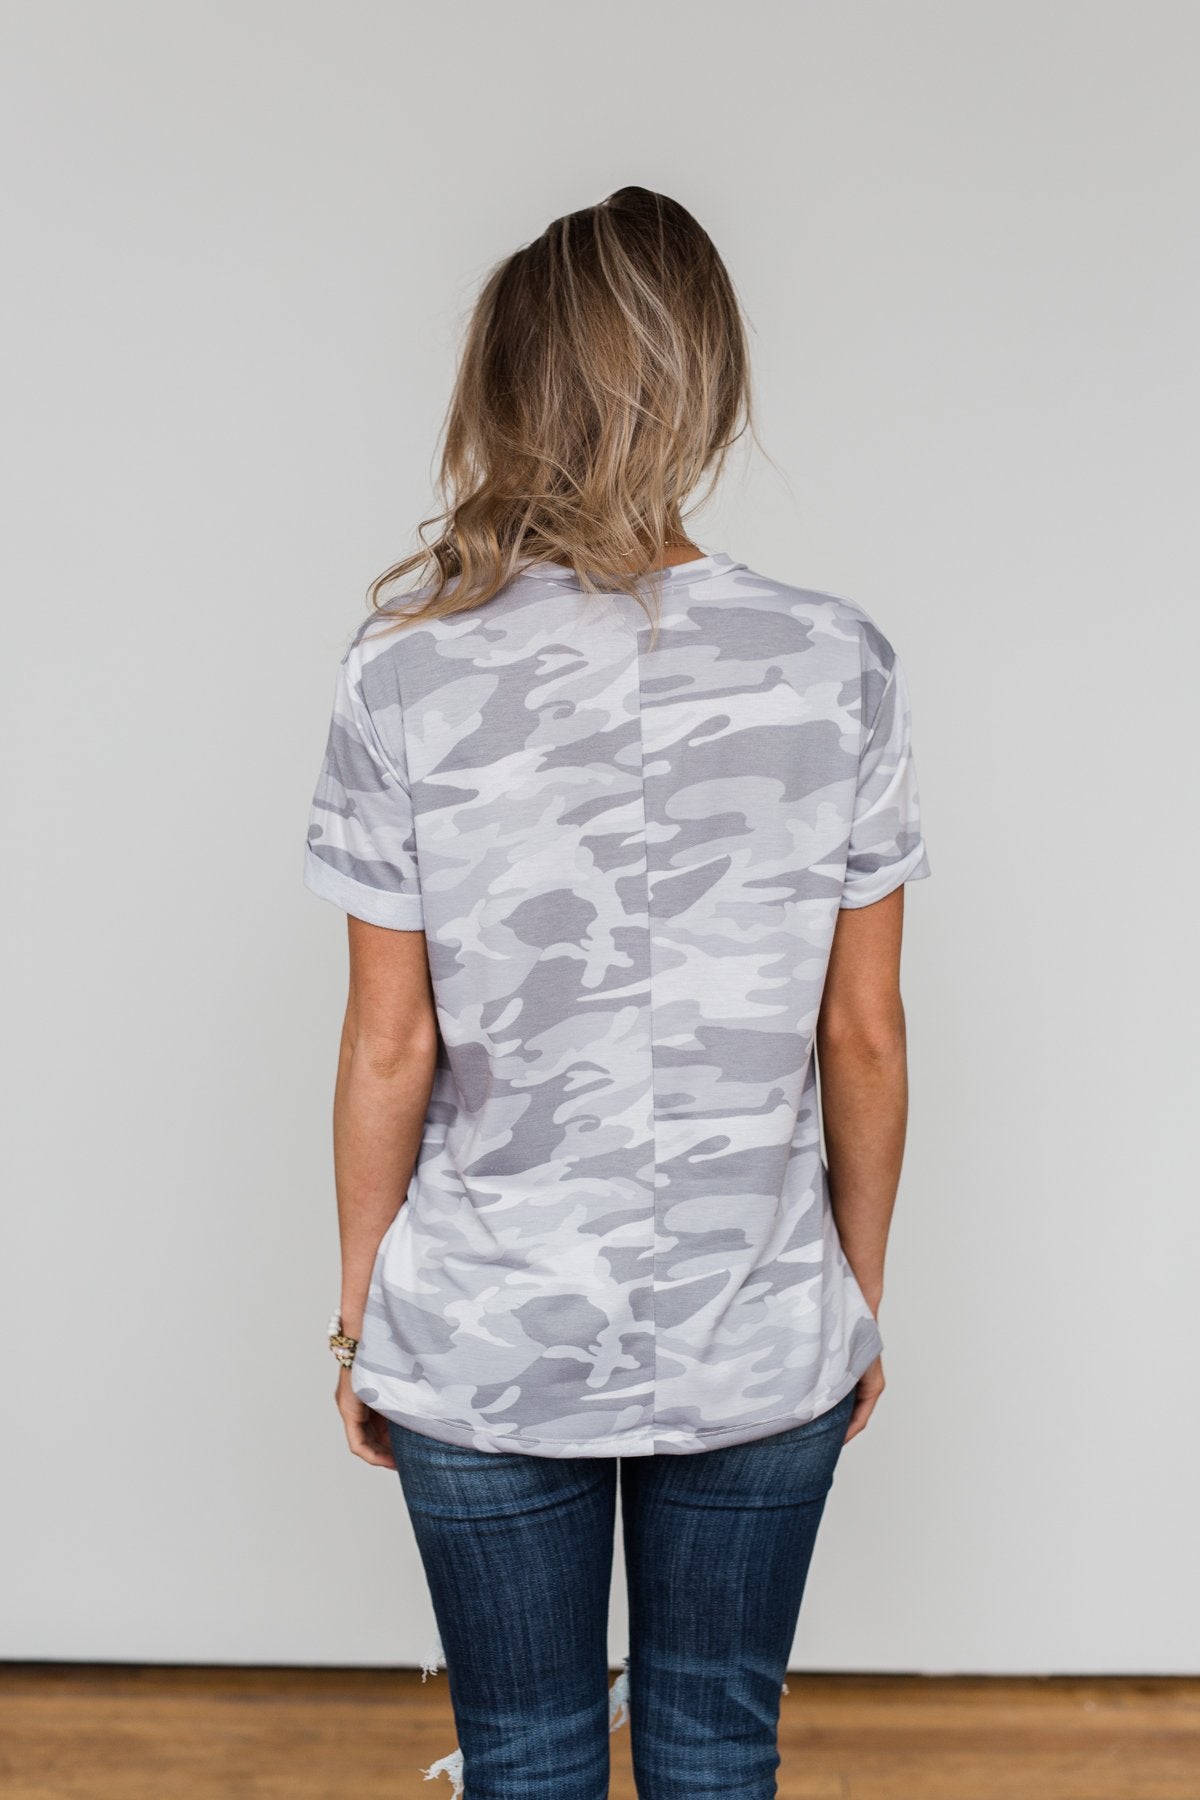 Catching Up With You Camo Top- Grey